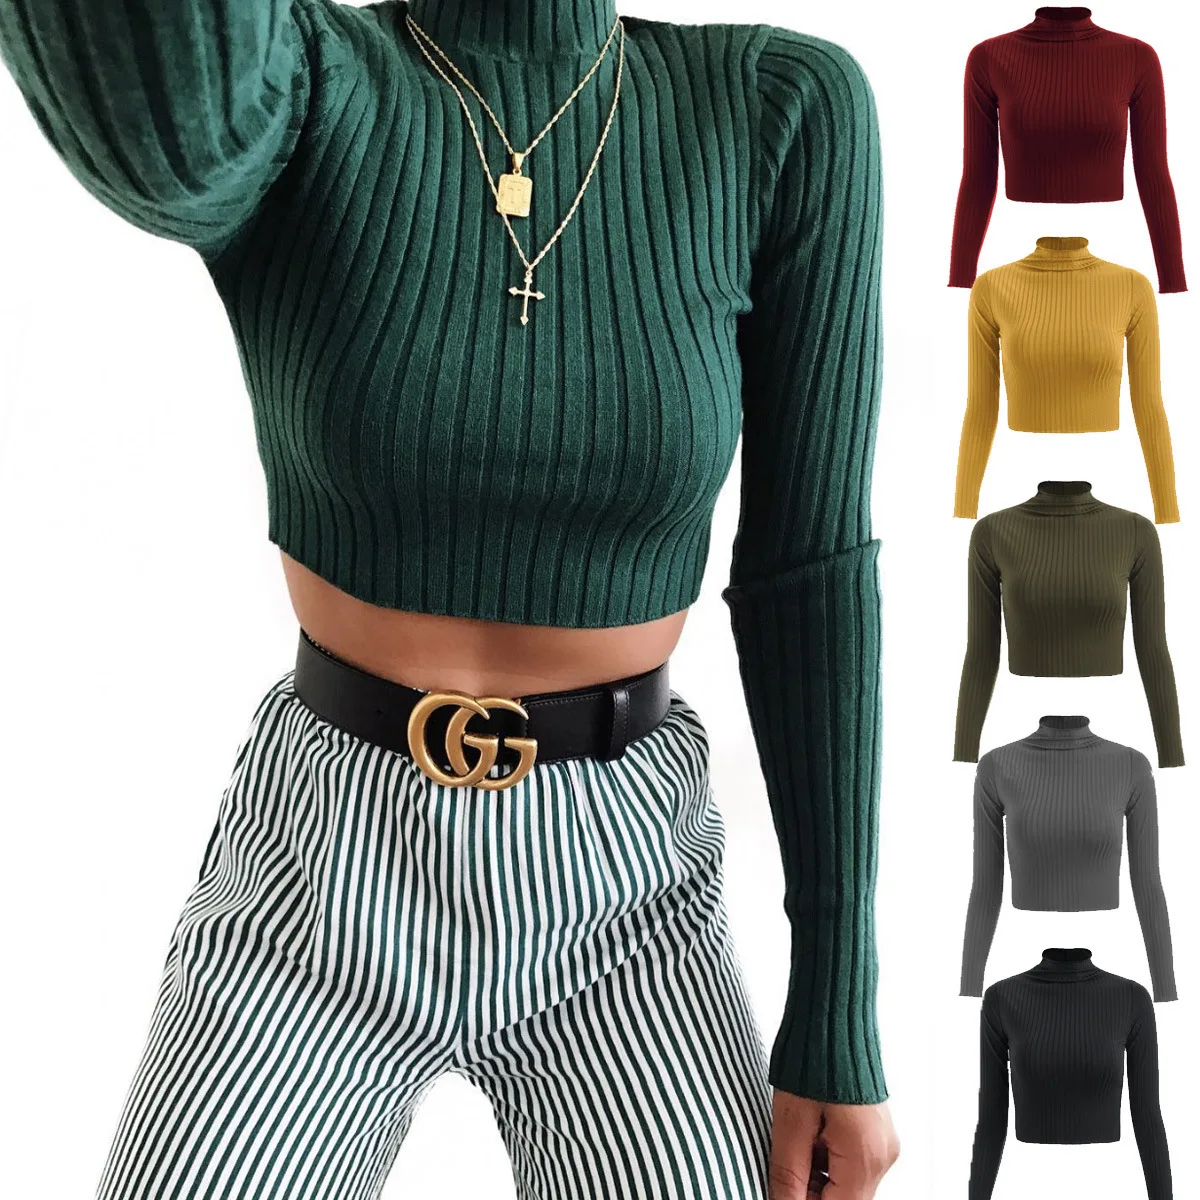 Turtleneck Sweaters Sexy Navel Bare Cropped Tops Women Autumn Winter Ribbed Jummers Lady Knitted Pullovers Short Solid | Женская одежда